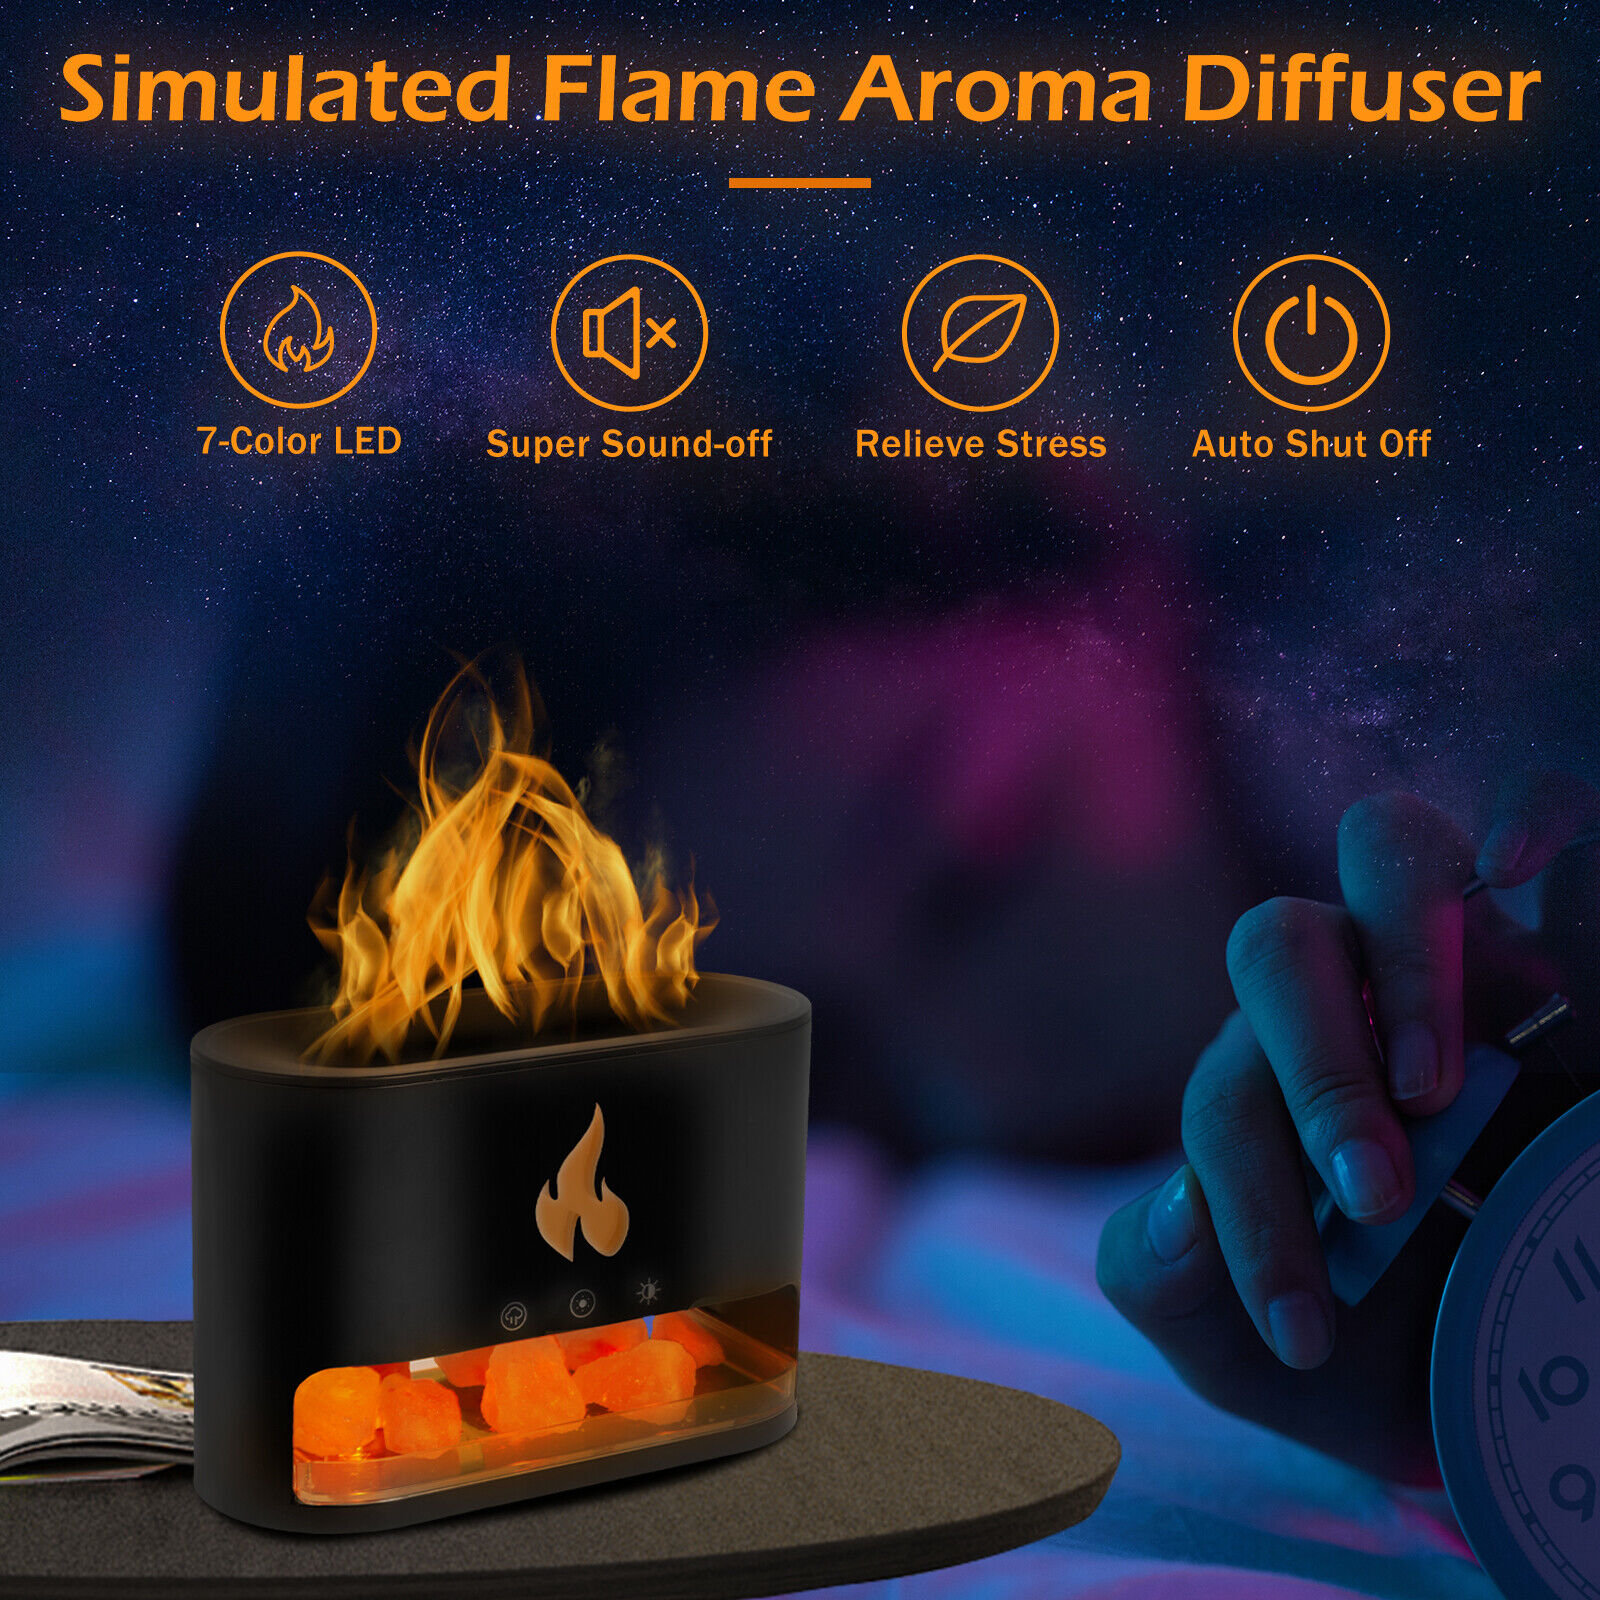 Buy Flame Diffuser Online In India -  India